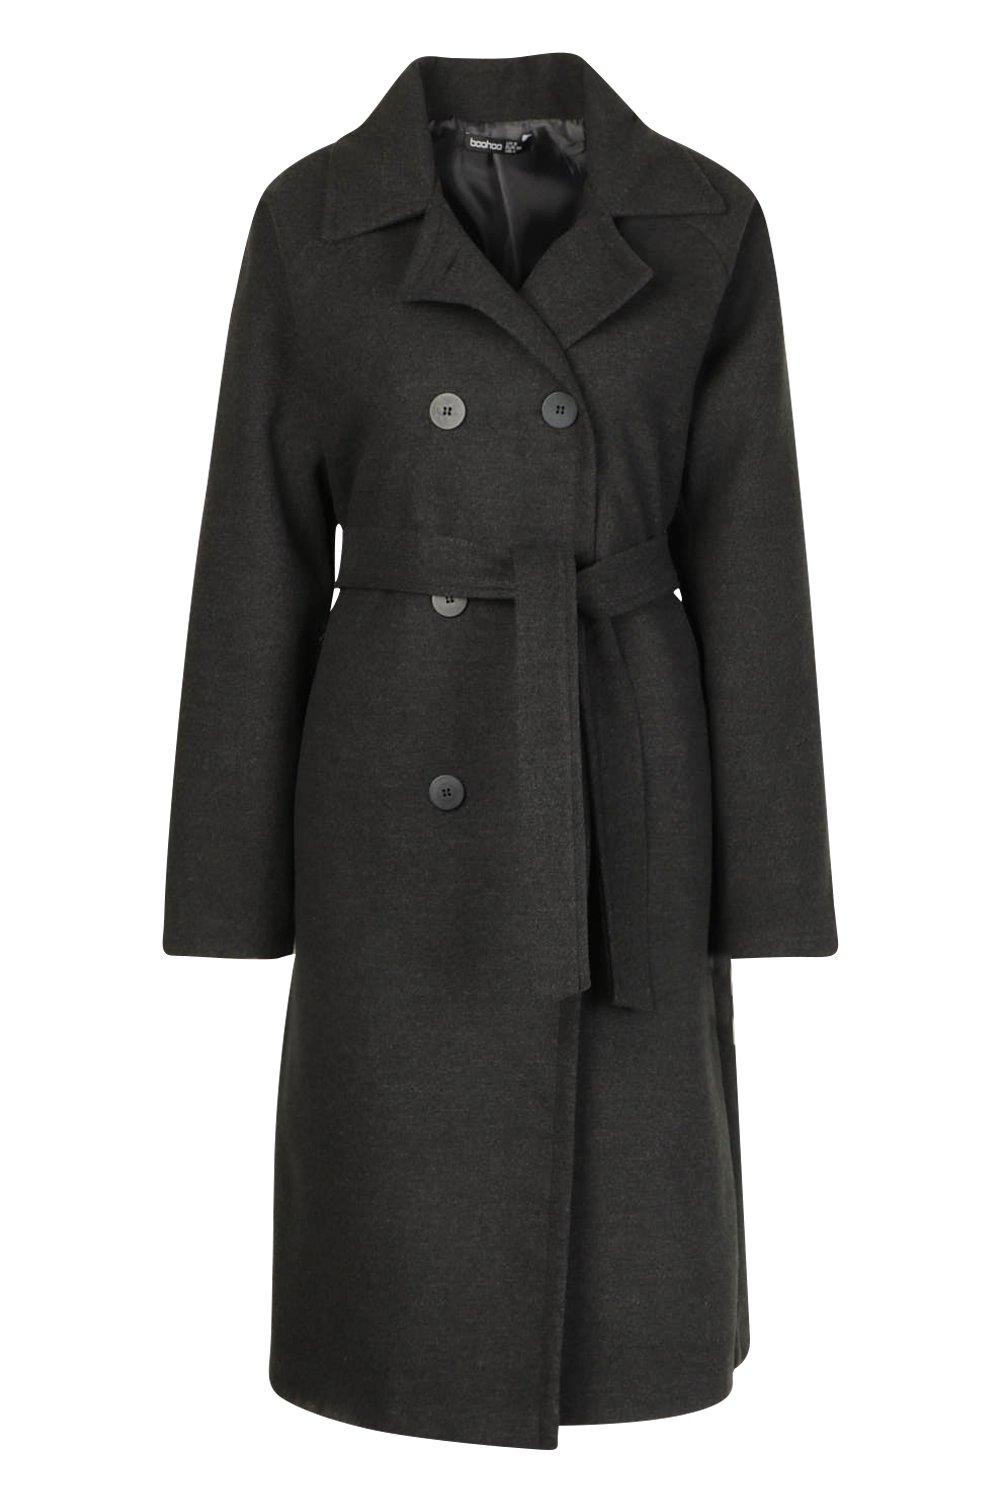 1940s Style Coats and Jackets for Sale